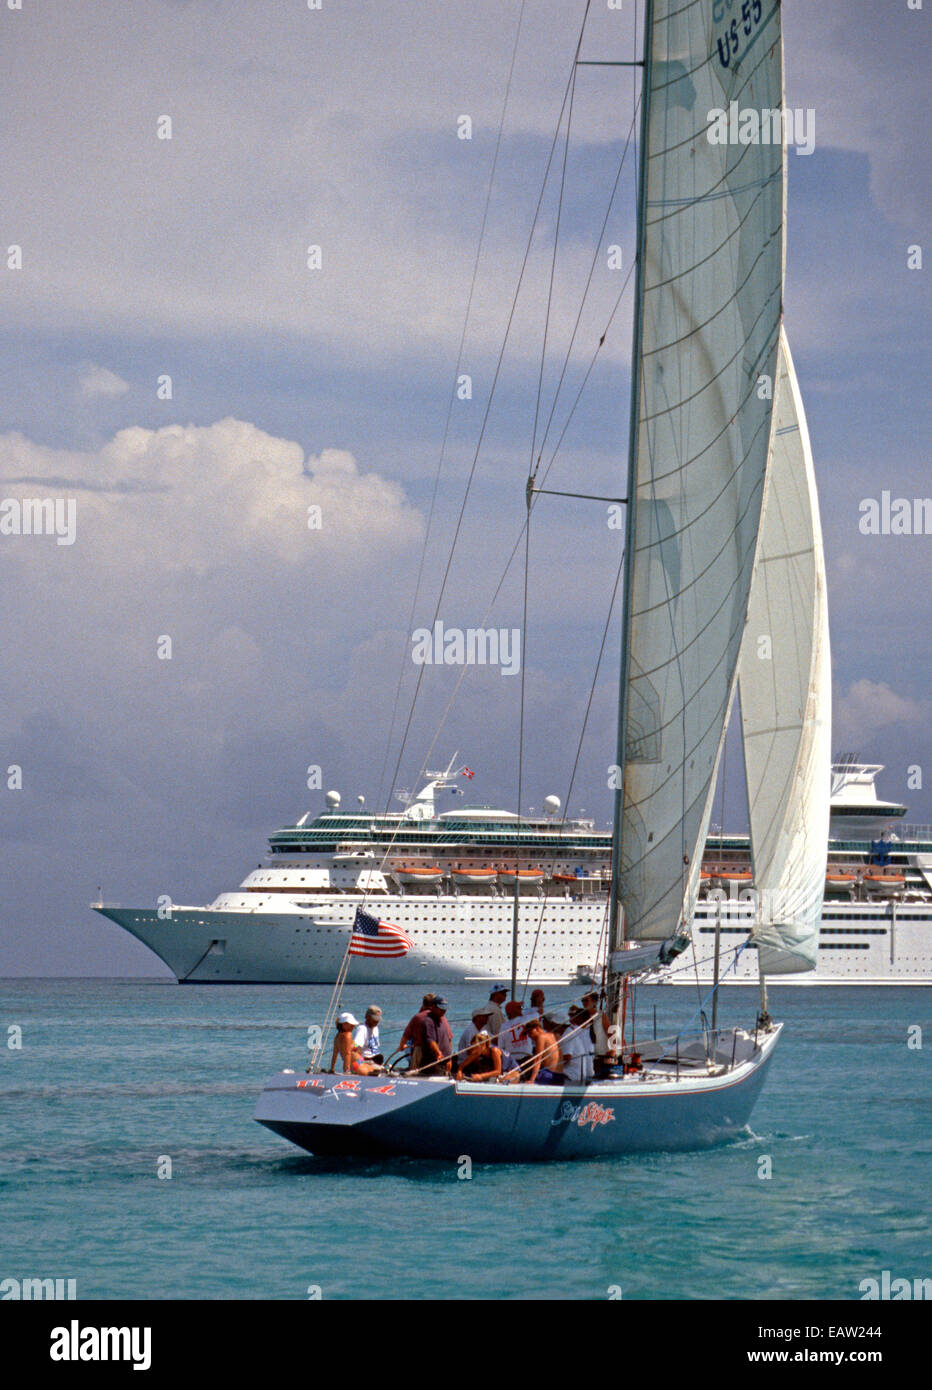 Yacht Racing Caribbean High Resolution Stock Photography And Images Alamy